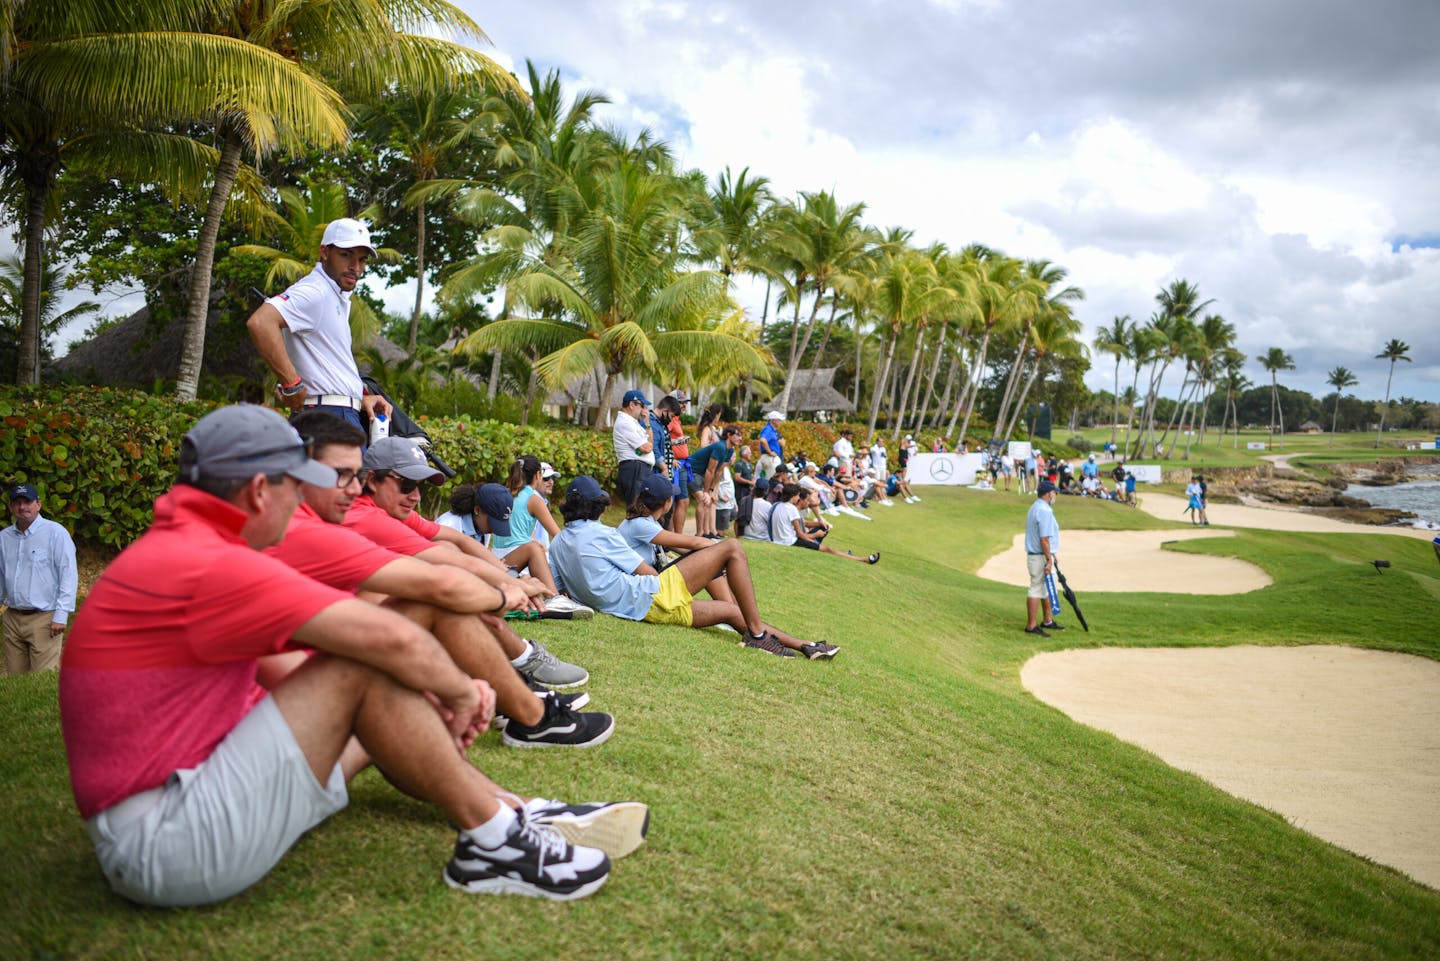 La Romana, DOMINICAN REPUBLIC: Pictured at the 2022 Latin America Amateur Championship at Casa de Campo Resort during Final Round on January 23rd, 2022.